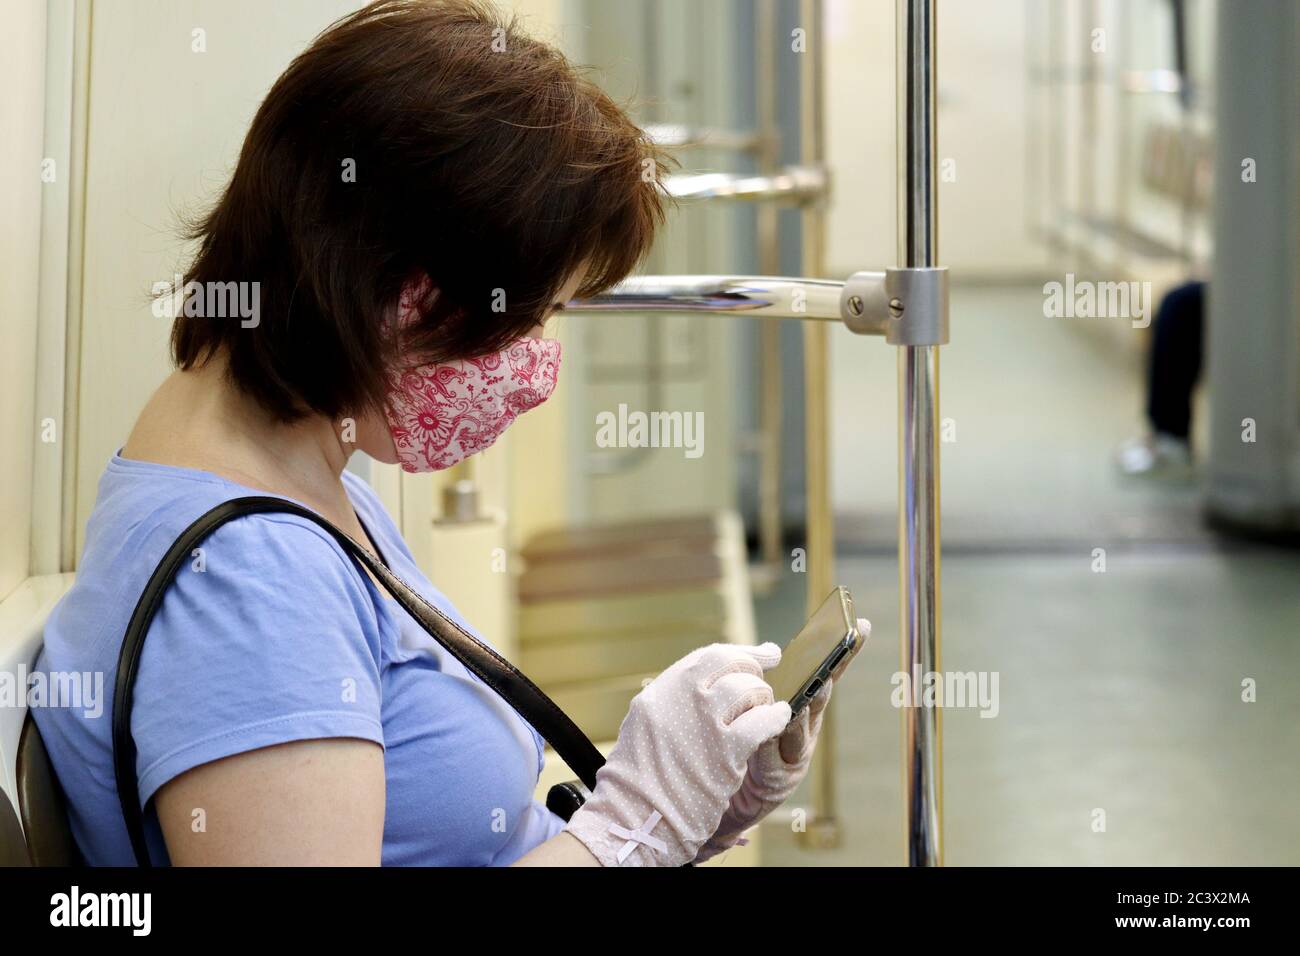 Woman in mask and protective gloves sitting in a metro train with smartphone. Interior of subway car during covid-19 coronavirus pandemic Stock Photo